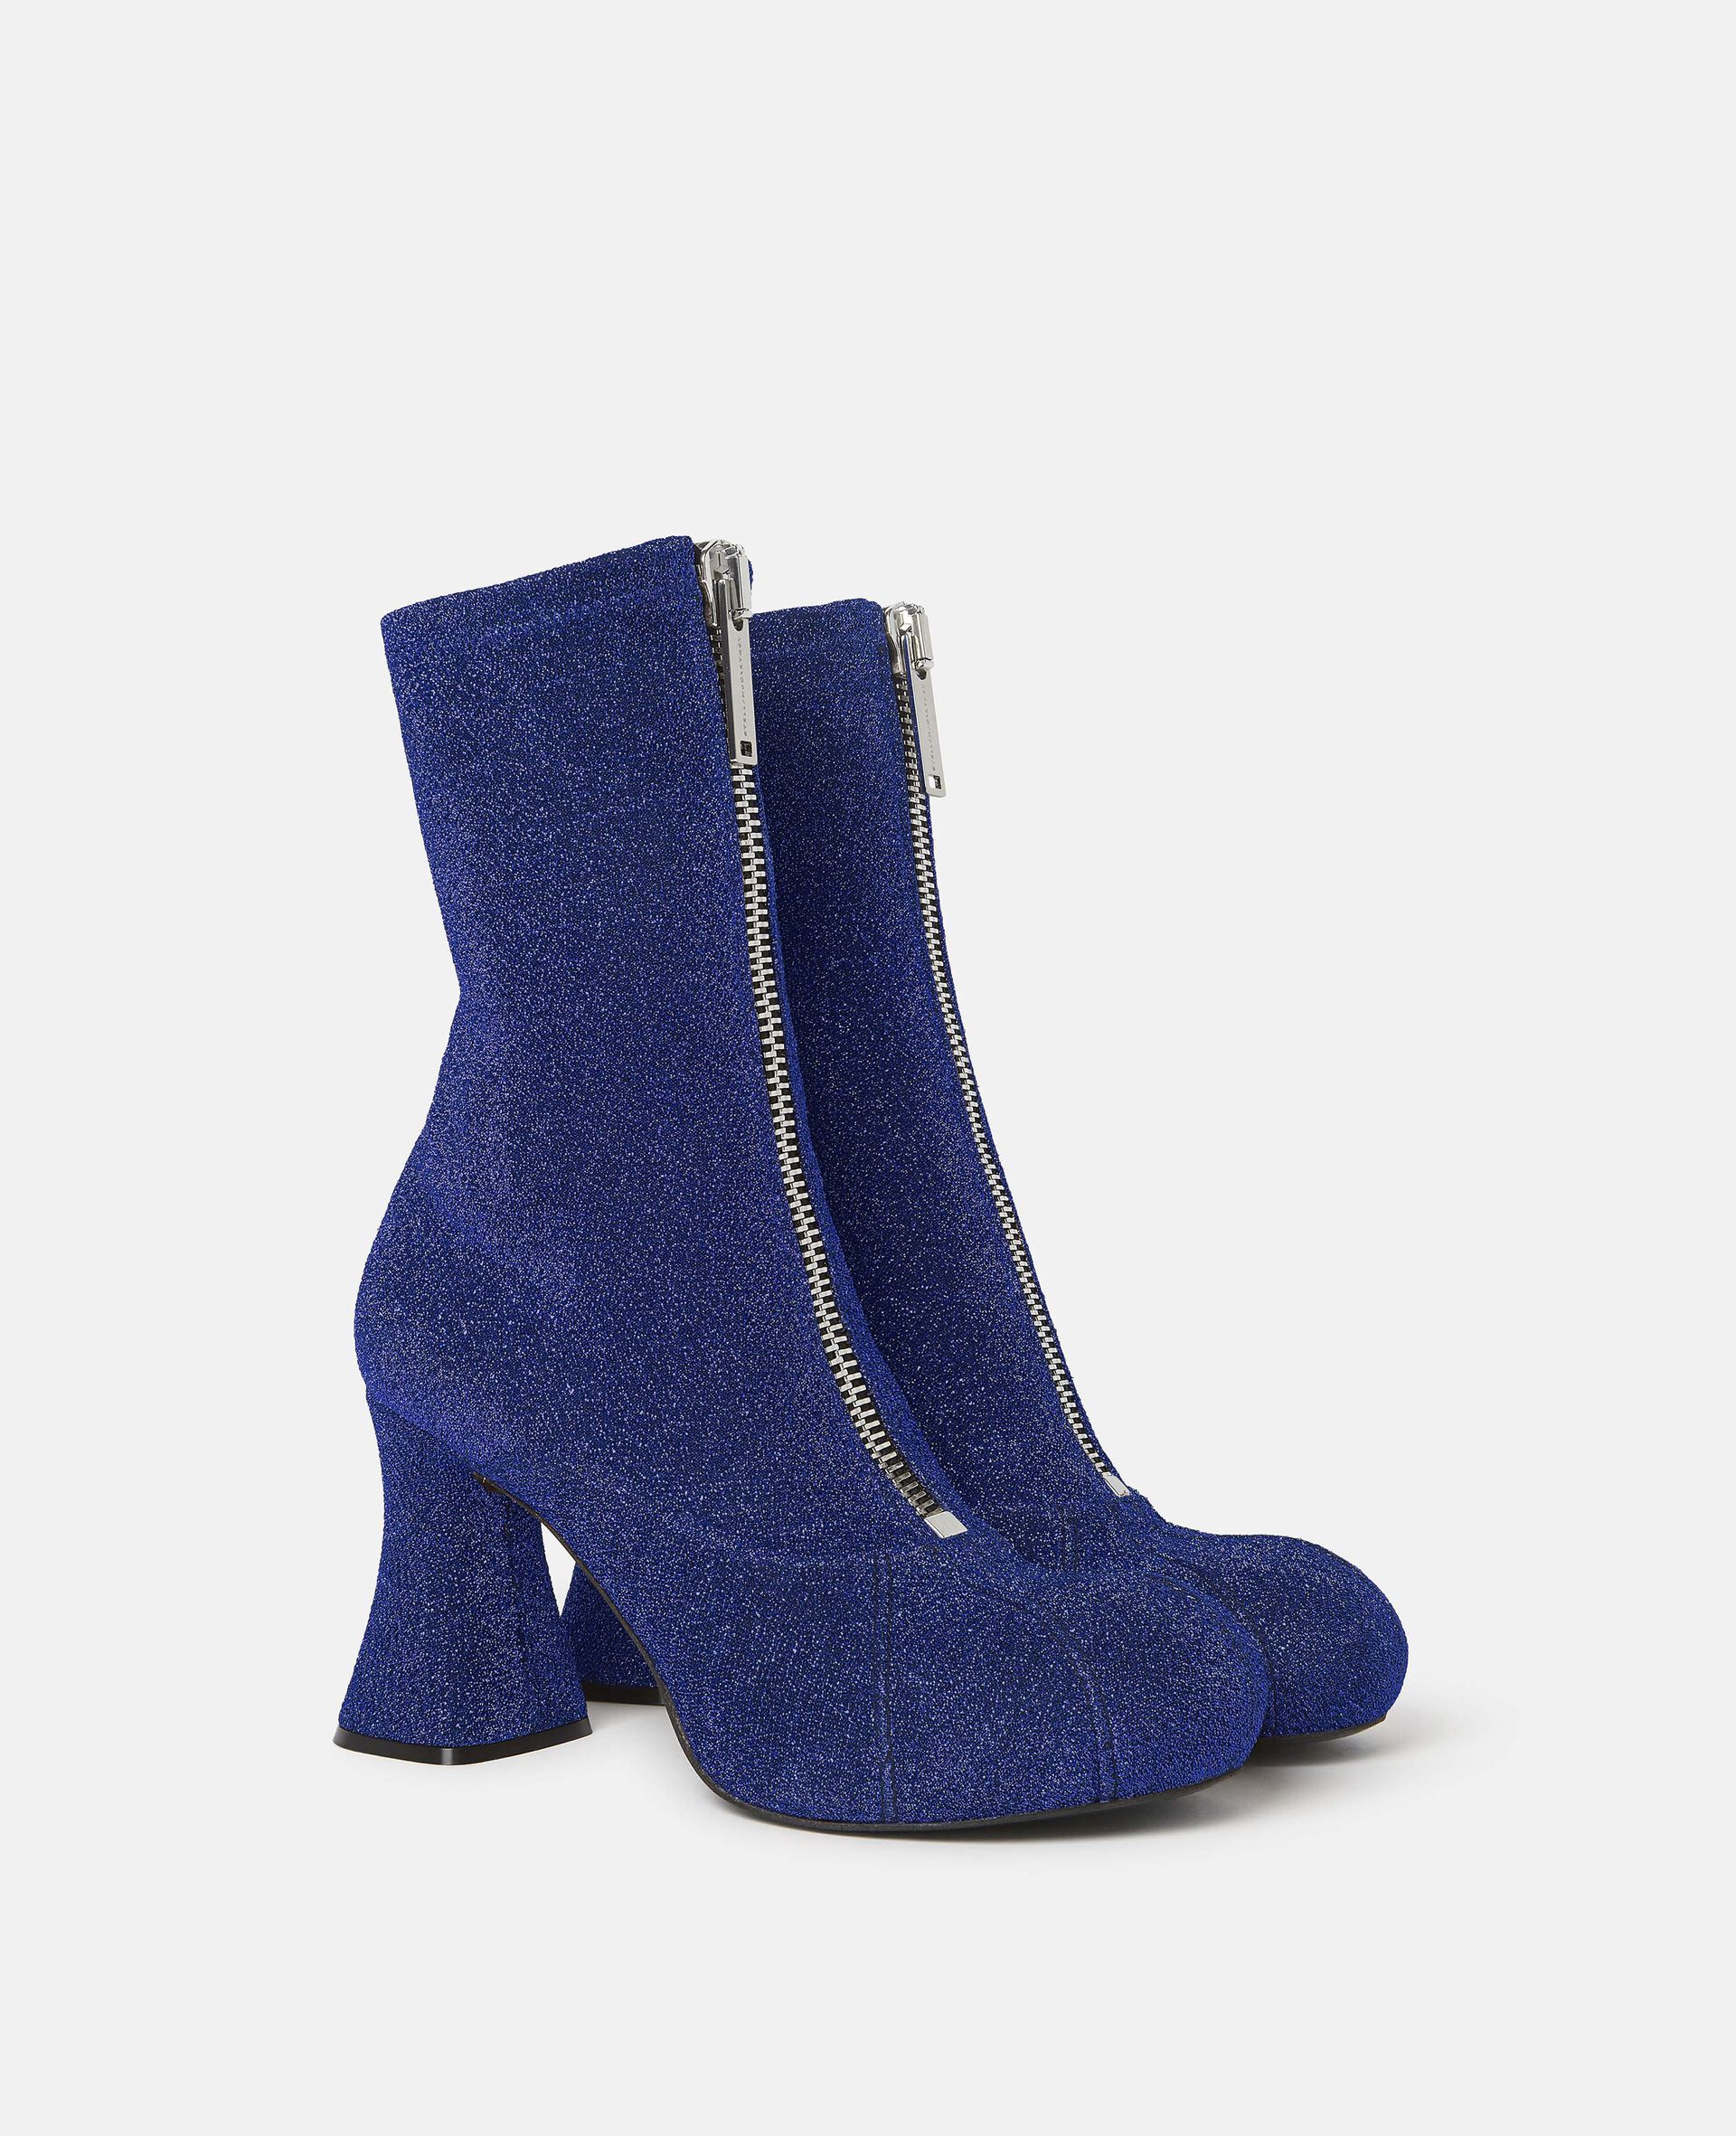 Groove Glitter Ankle Boots -Blue-large